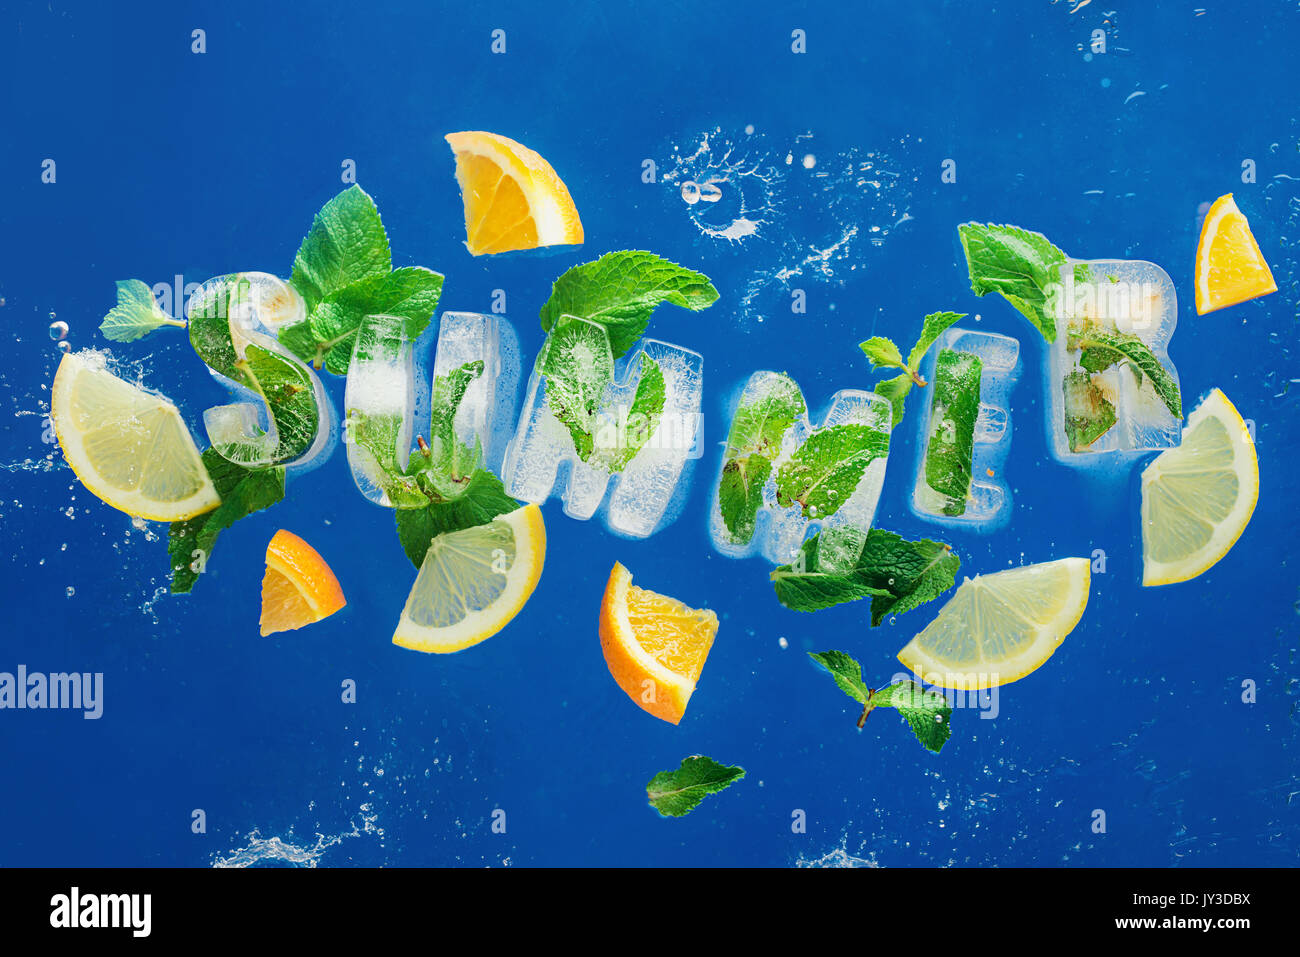 Ice cube lettering with frozen mint leaves, lemon slices and oranges on a blue background with water splashes. Text says Summer Stock Photo